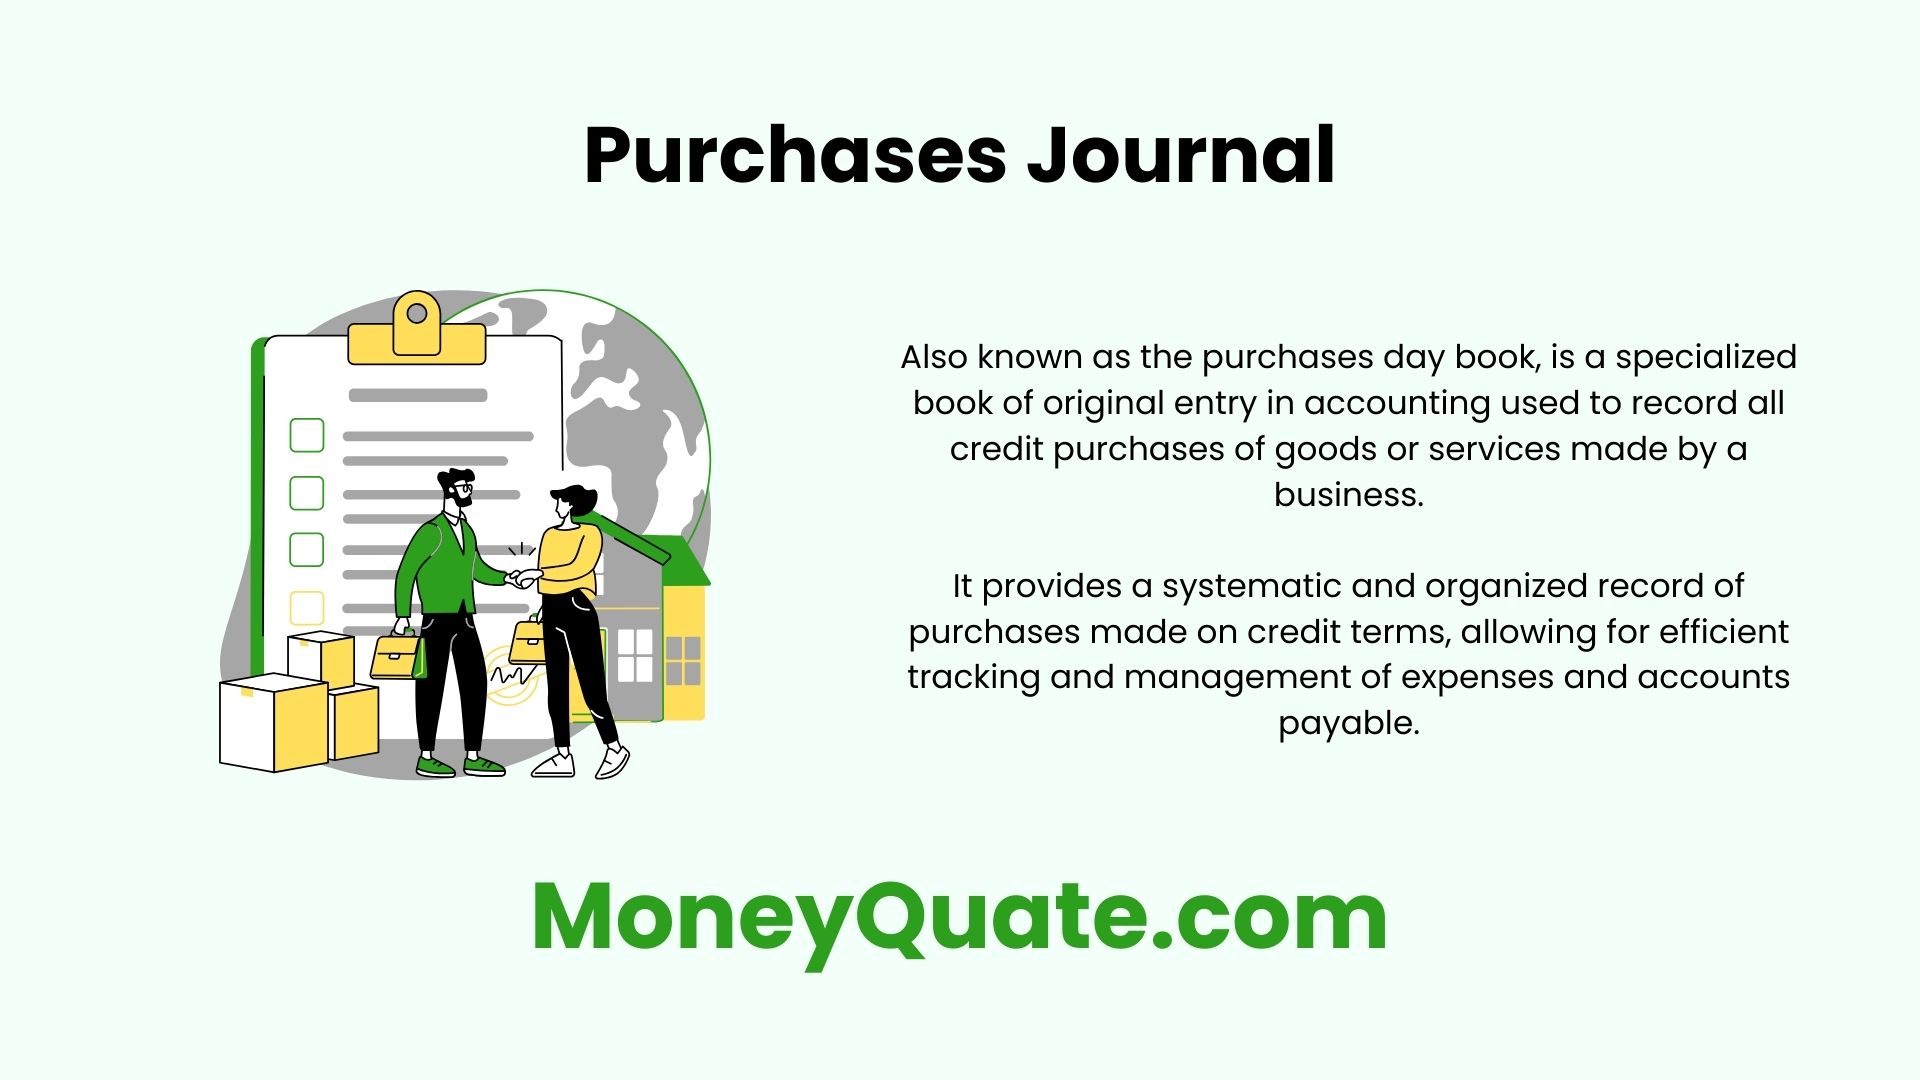 Purchases Journal Made Easy: A Step-by-Step Guide for Beginners